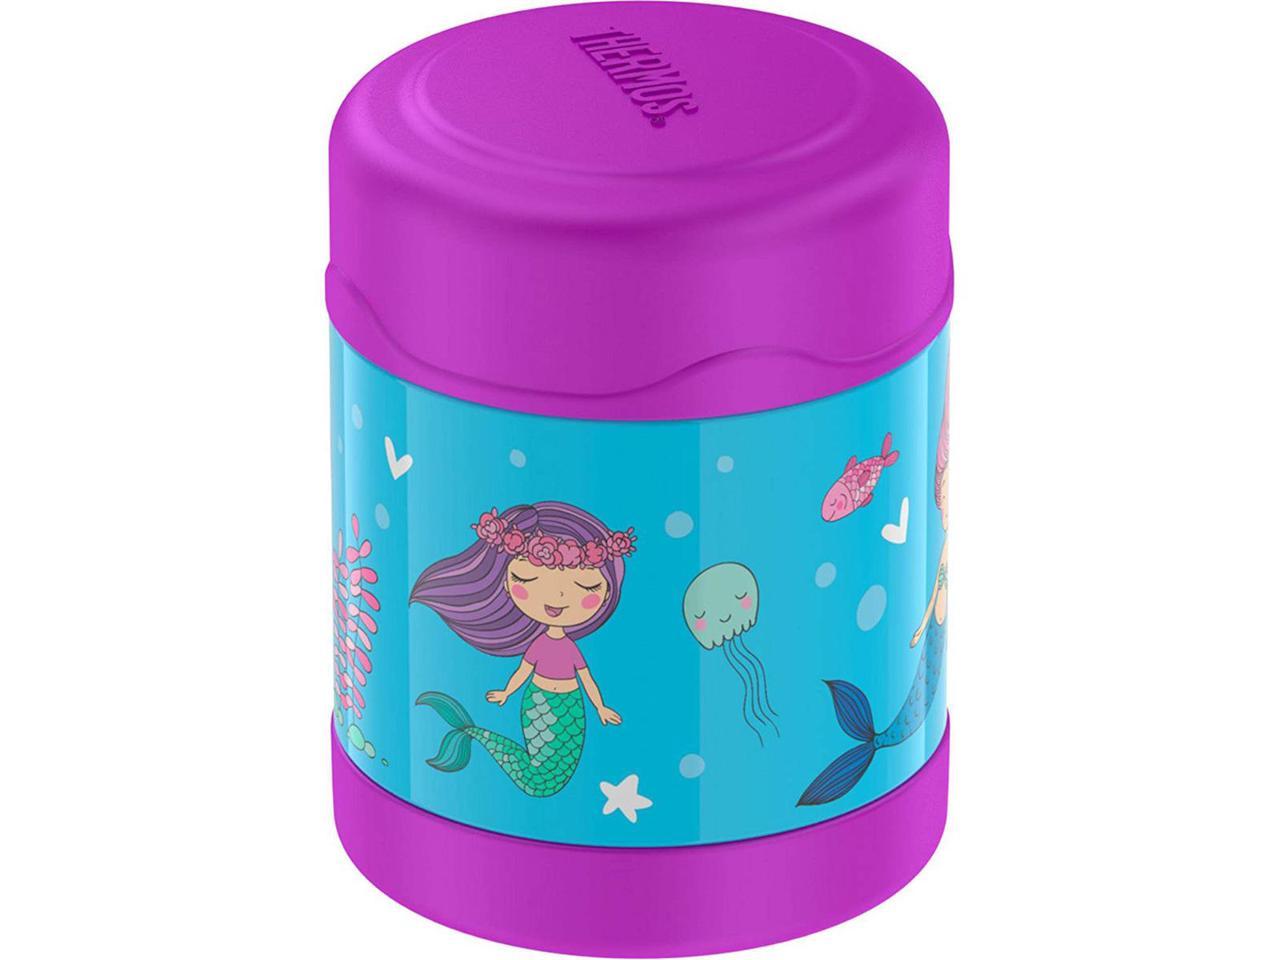 Your Choice *Mermaid* Or *Dino* Brand New Thermos 10oz FUNtainer Food Jar